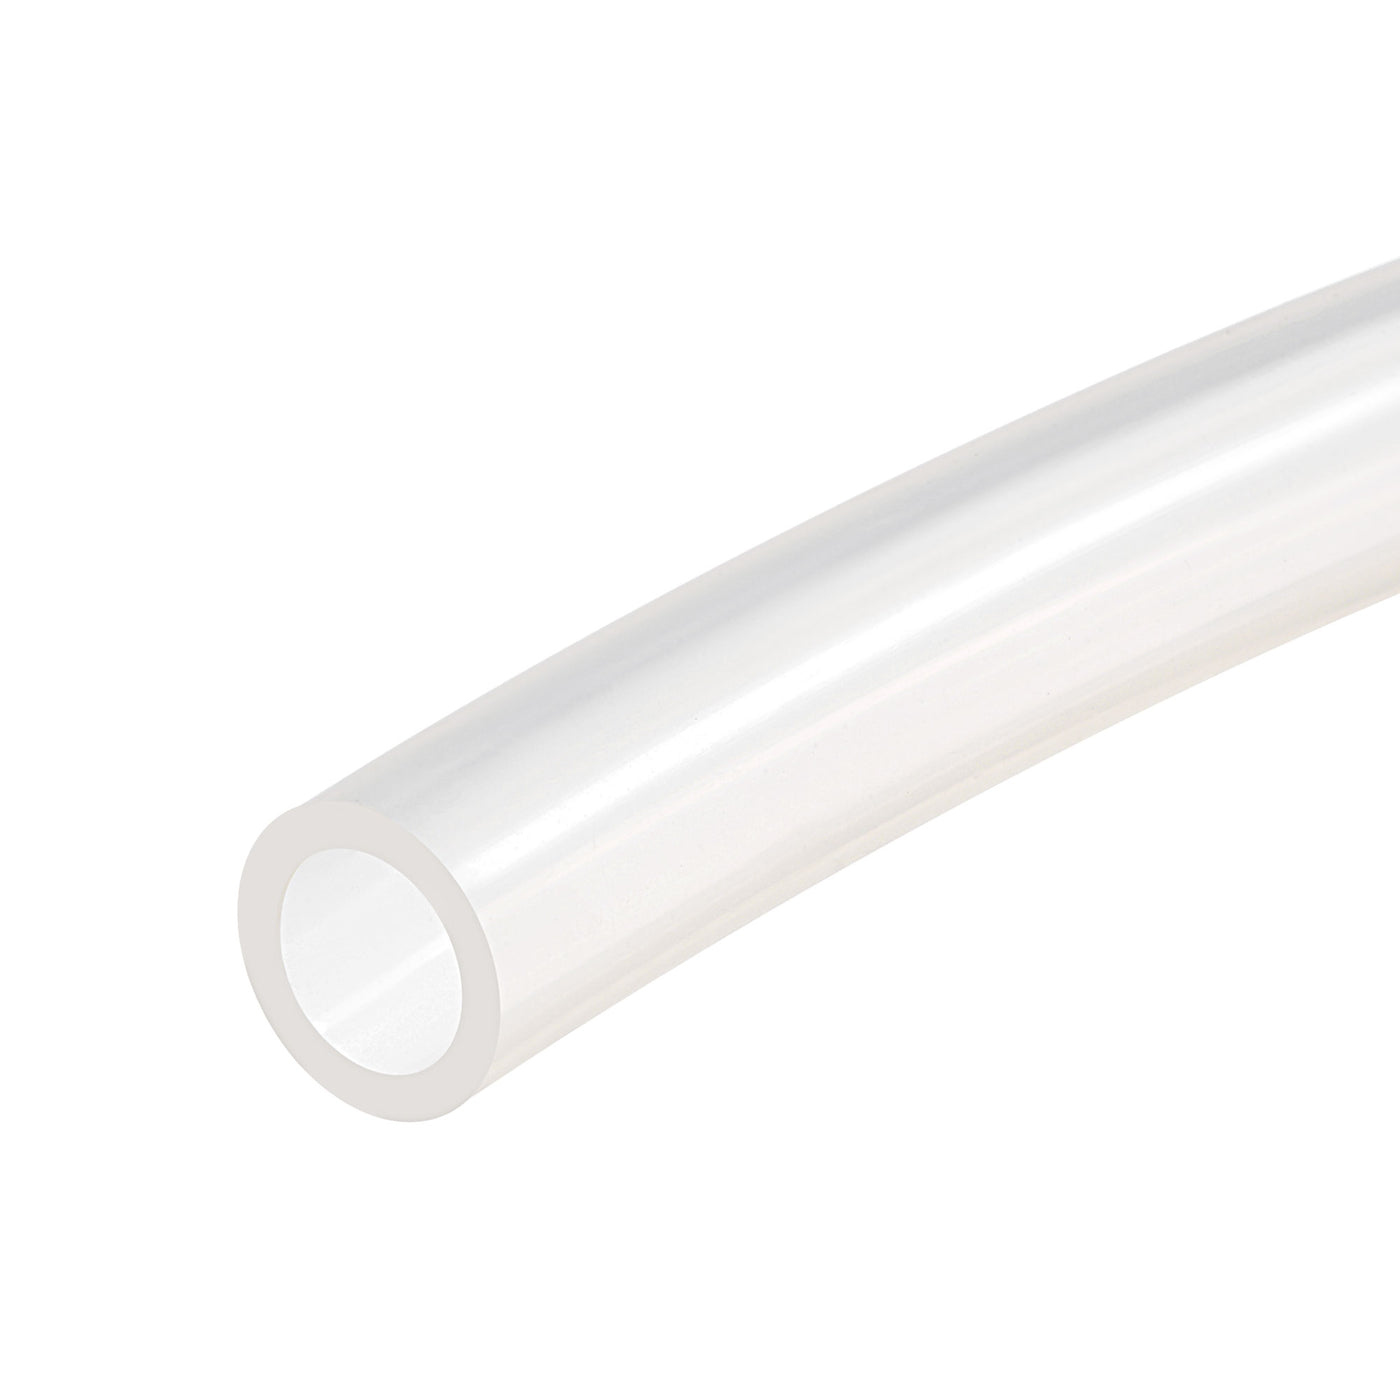 uxcell Uxcell PVC Clear Vinyl Tubing, 13mm(1/2-inch) ID 18mm OD 13ft Plastic Pipe Air Water Hose